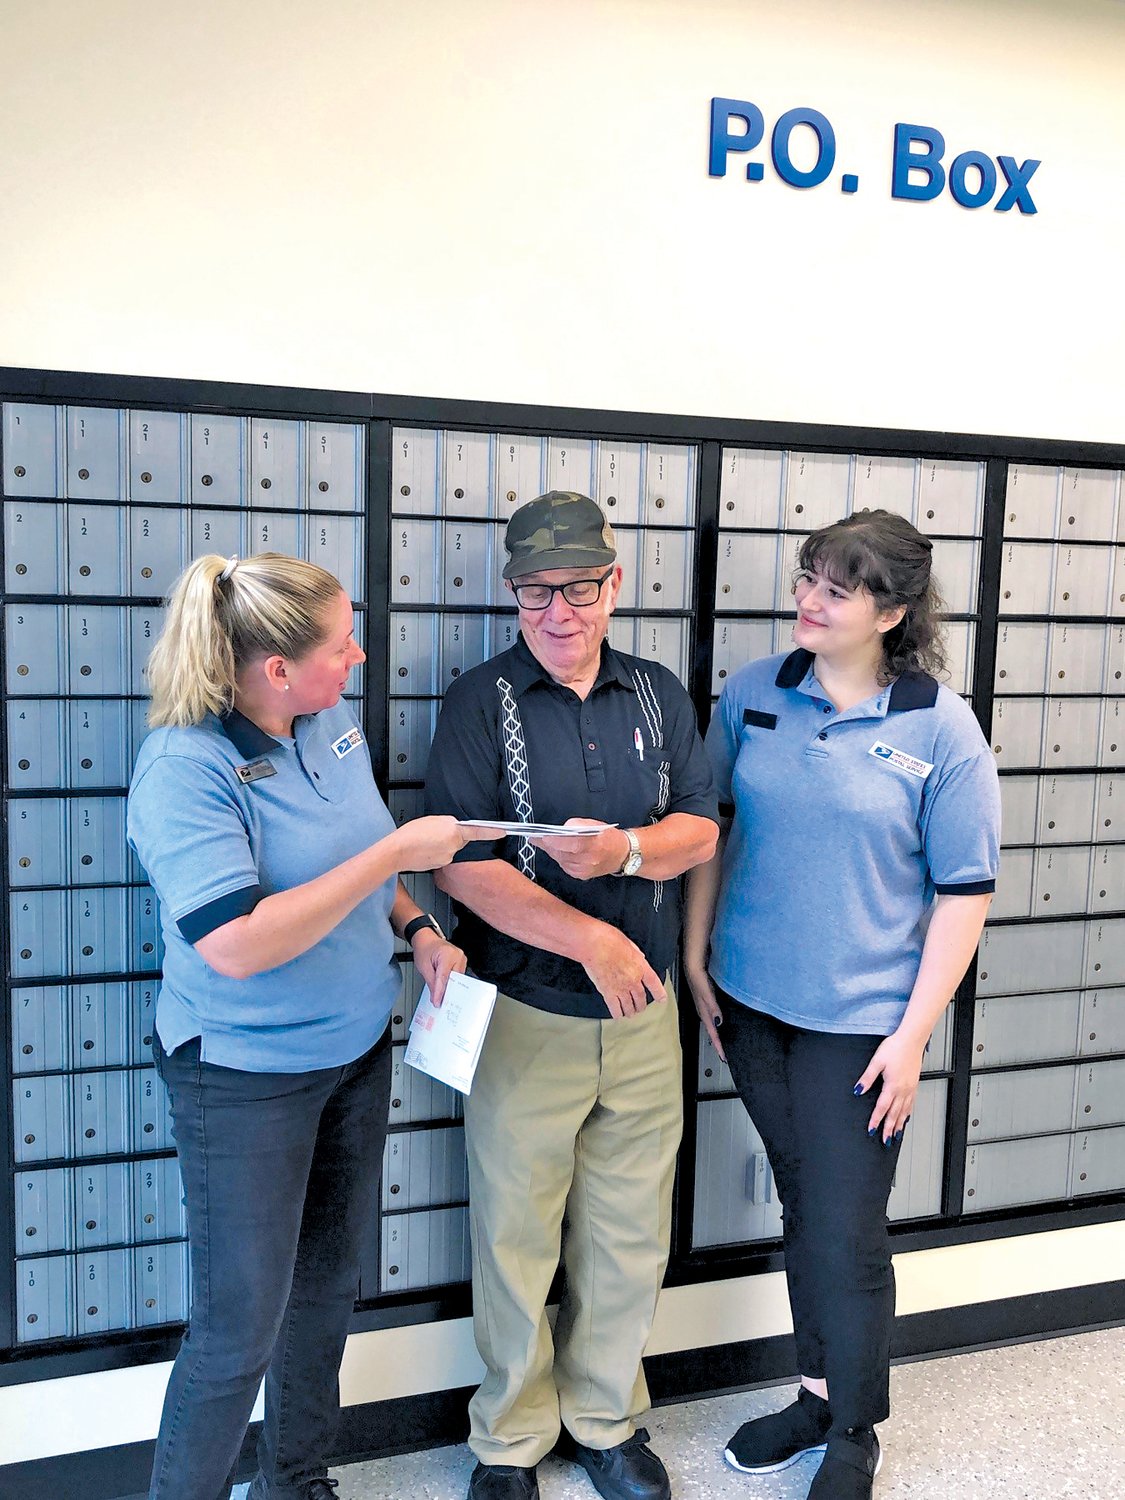 United States Postal Service clerks Melissa Rittenhouse and Amy Brandt greet Dublin resident Terry Gray at the new Dublin Post Office, located at 301 Station Drive.